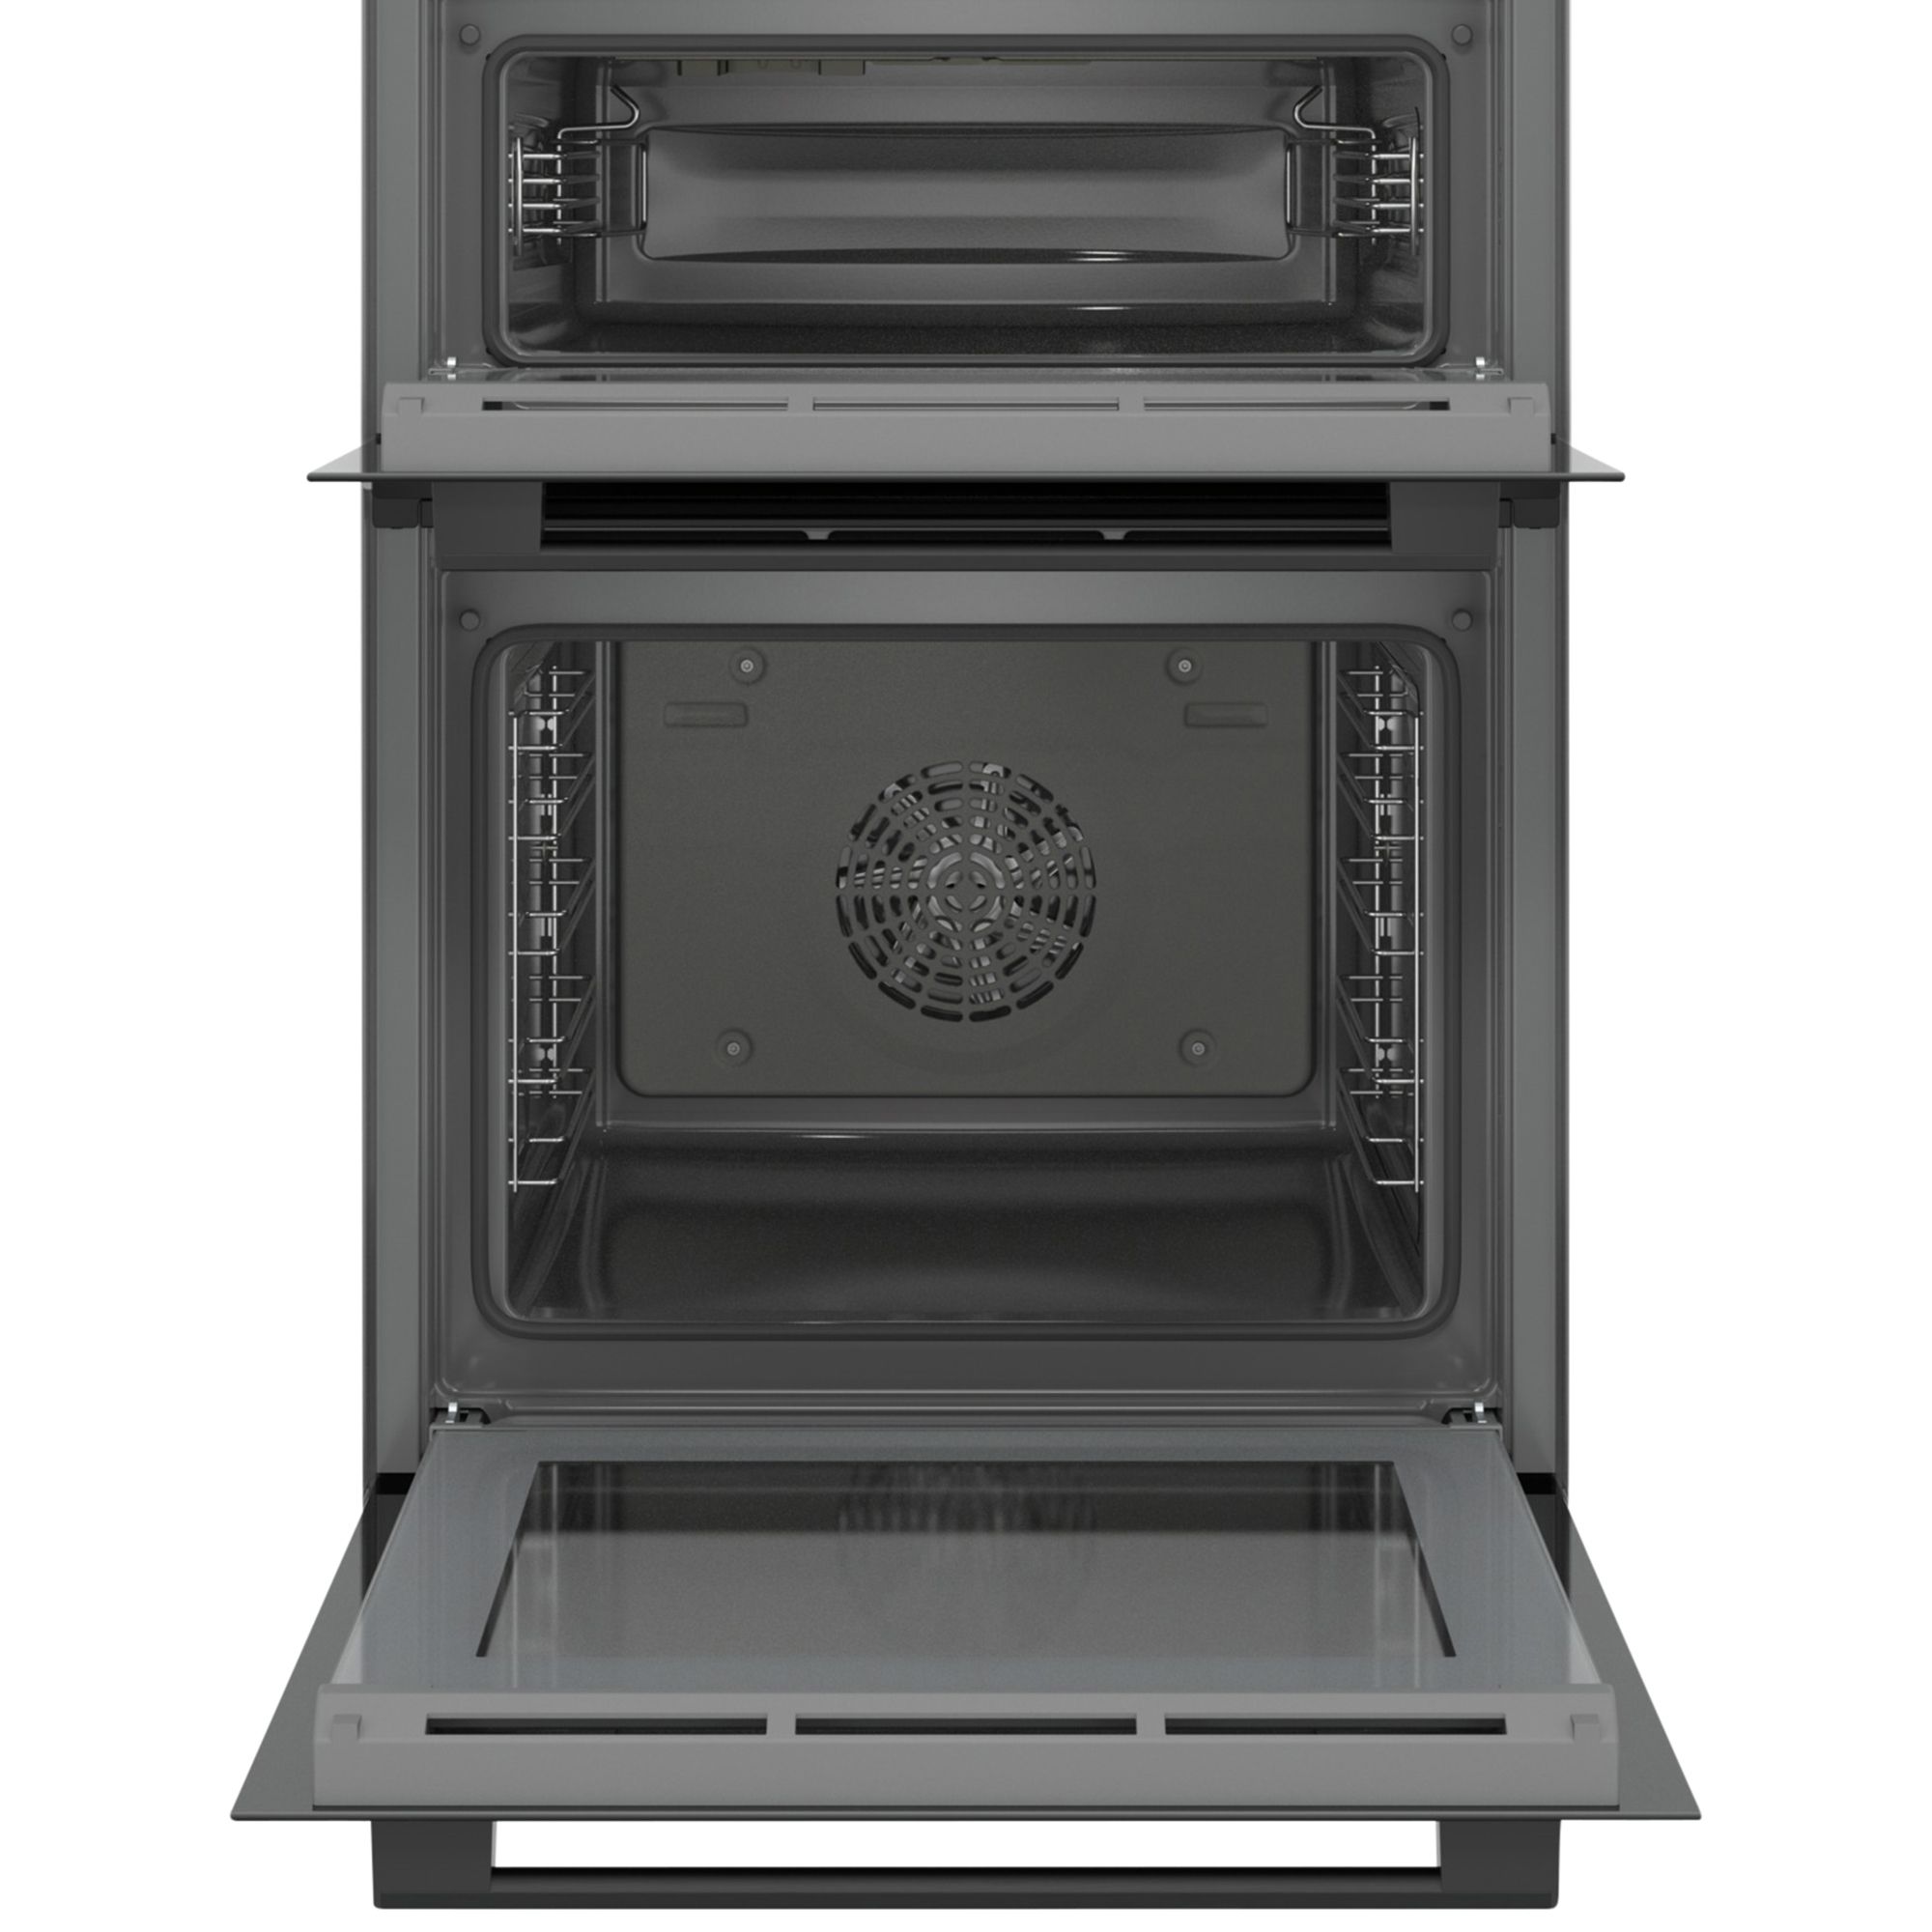 Bosch MBS533BB0B Built-in Double oven - Black